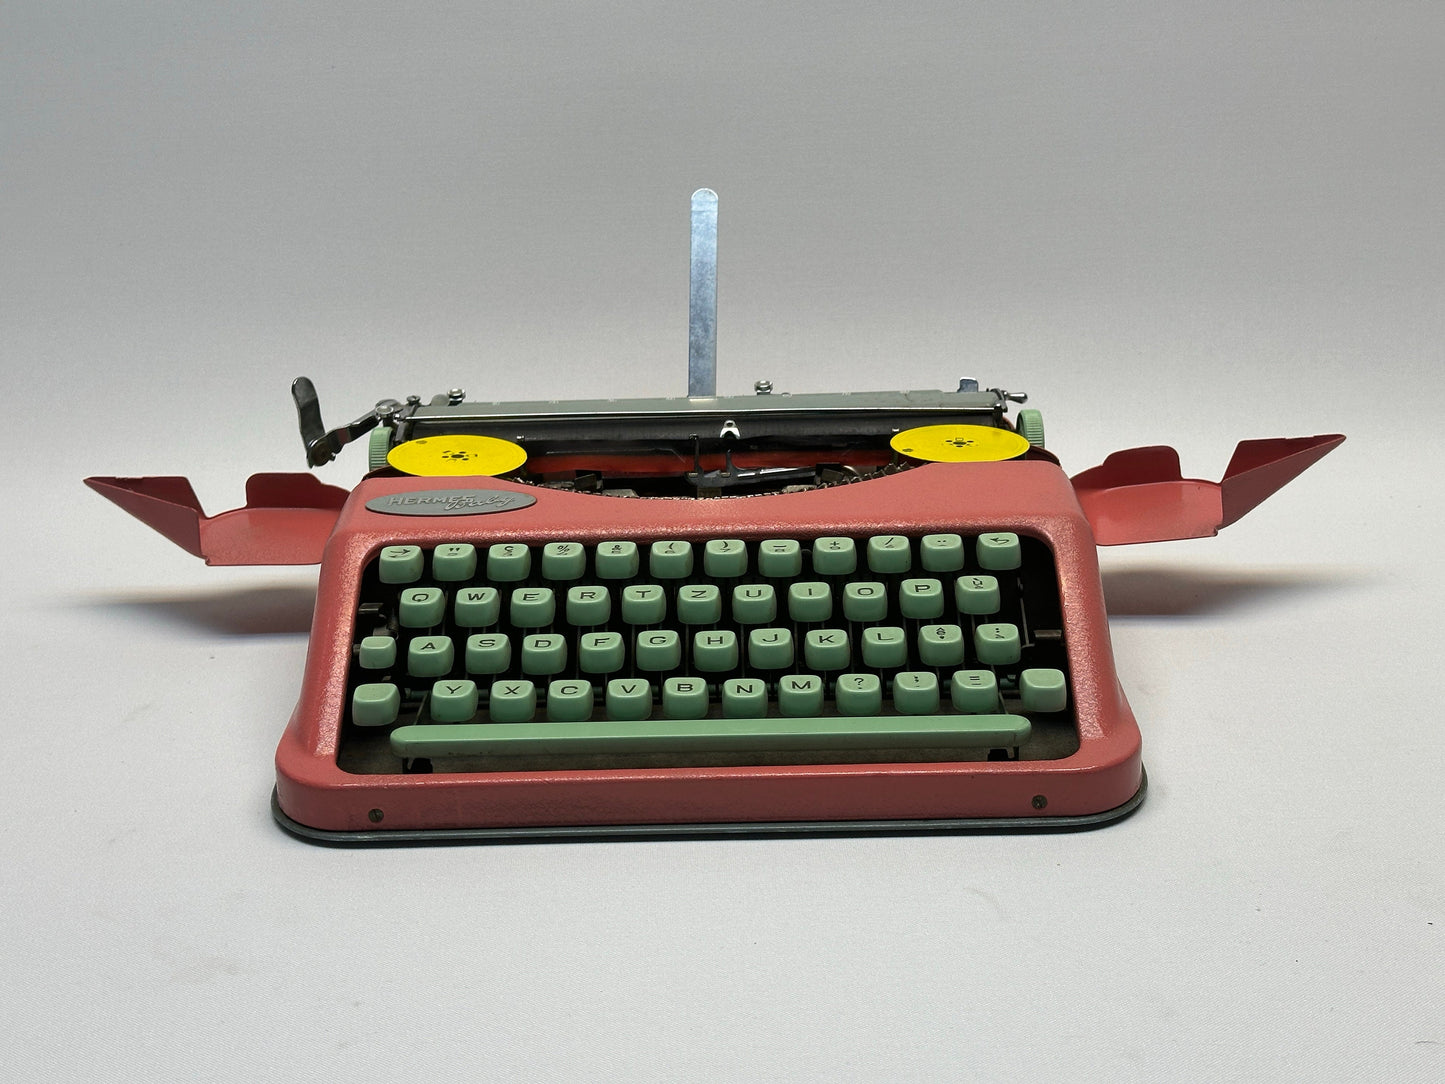 Great gift! Hermes BABY Typewriter - Green QWERTZ Keyboard: The Perfect Gift!